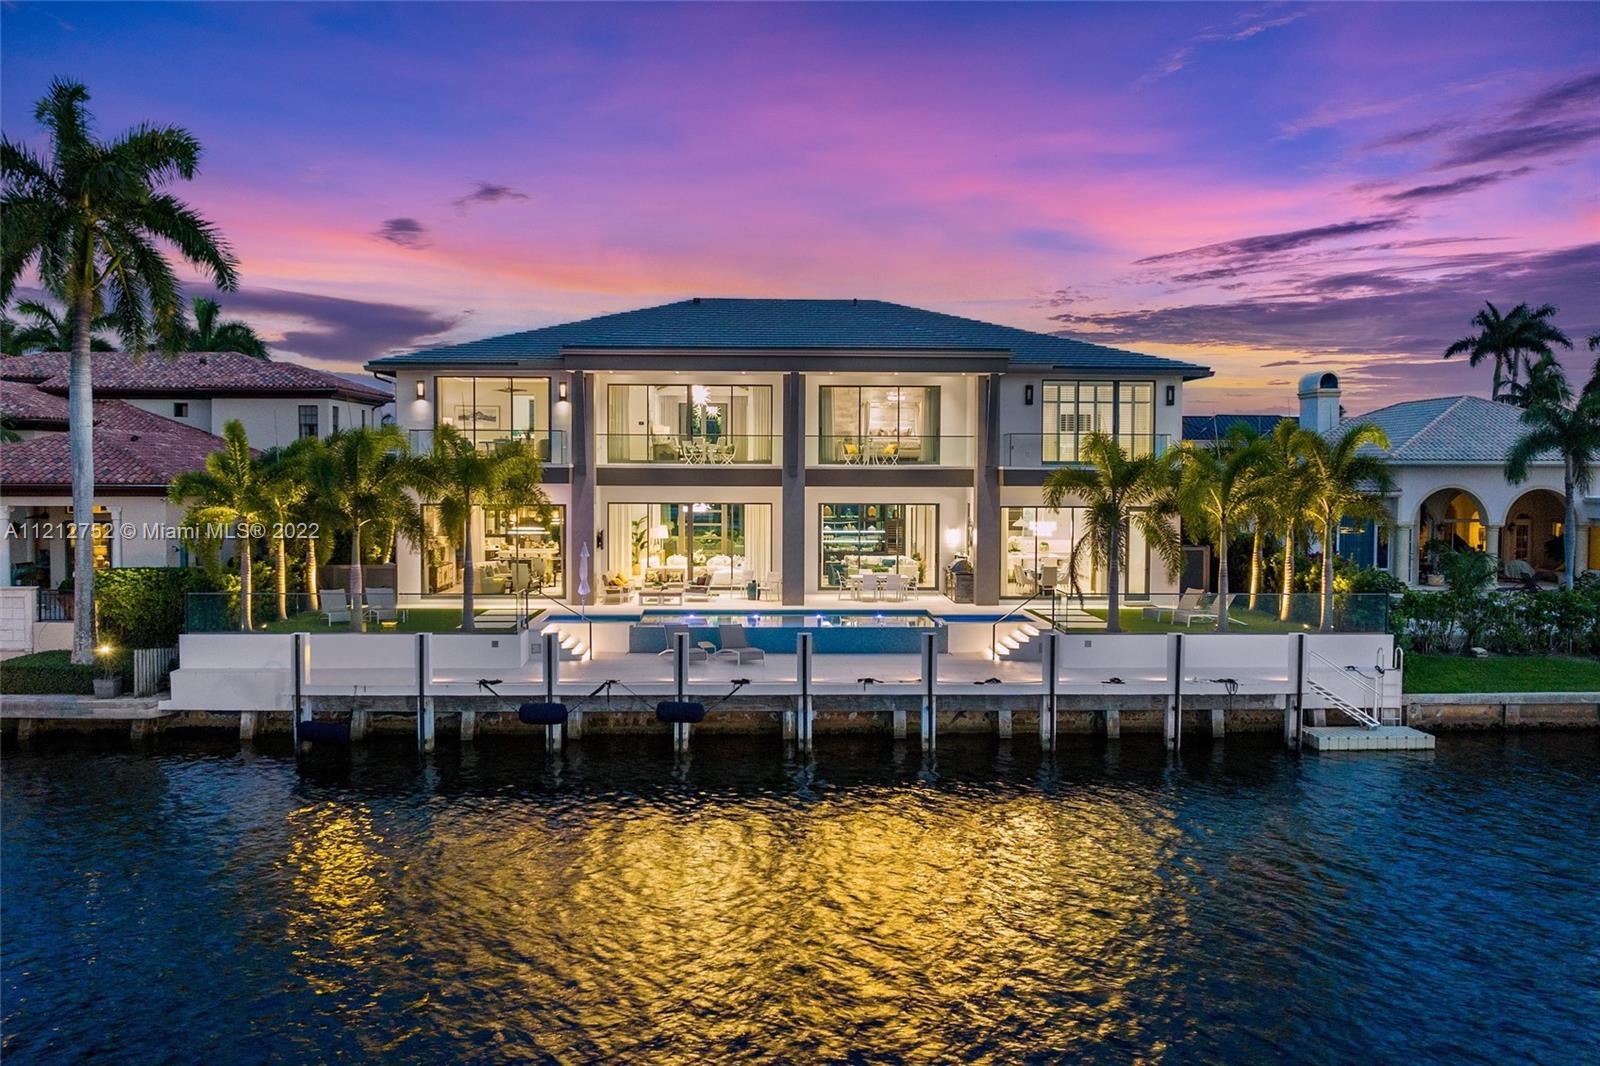 Welcome to 169 W. Key Palm Road in Boca Raton, a visionary display of architectural intrigue and sof